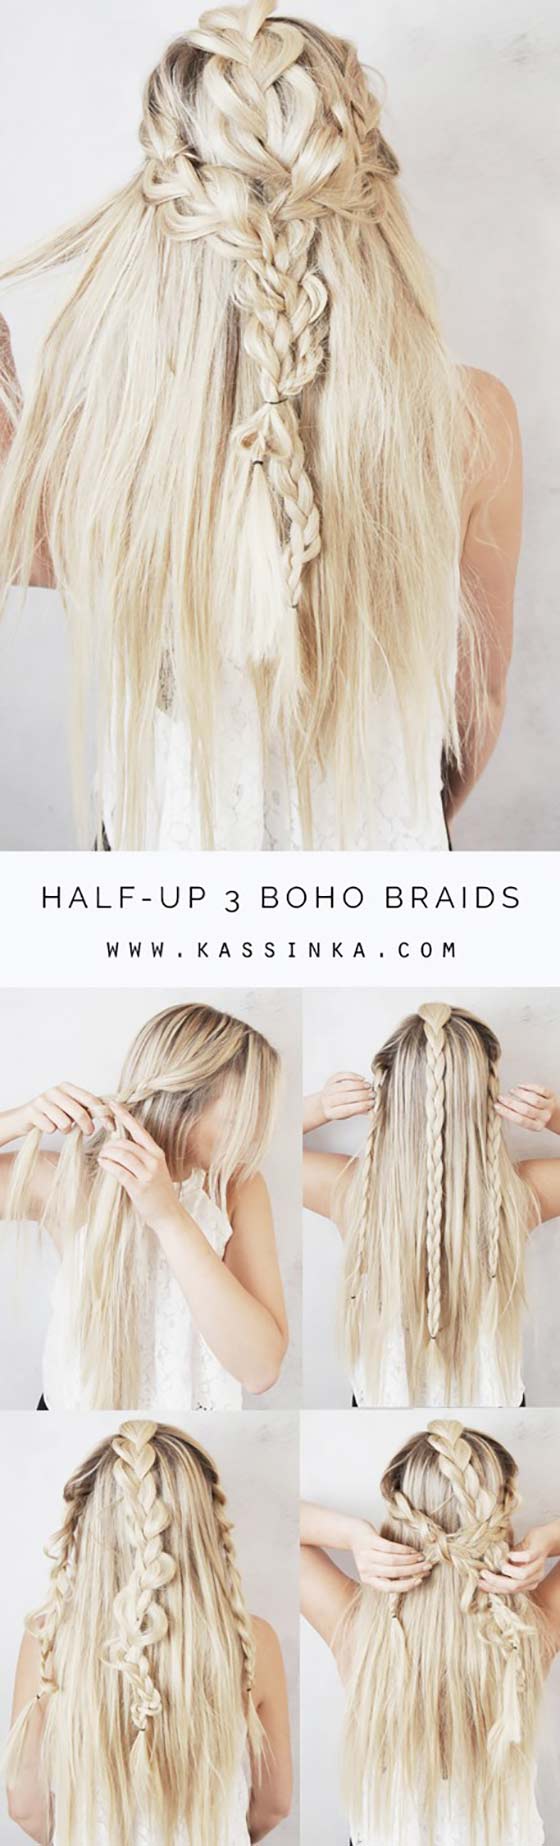 40 Braided Hairstyles For Long Hair